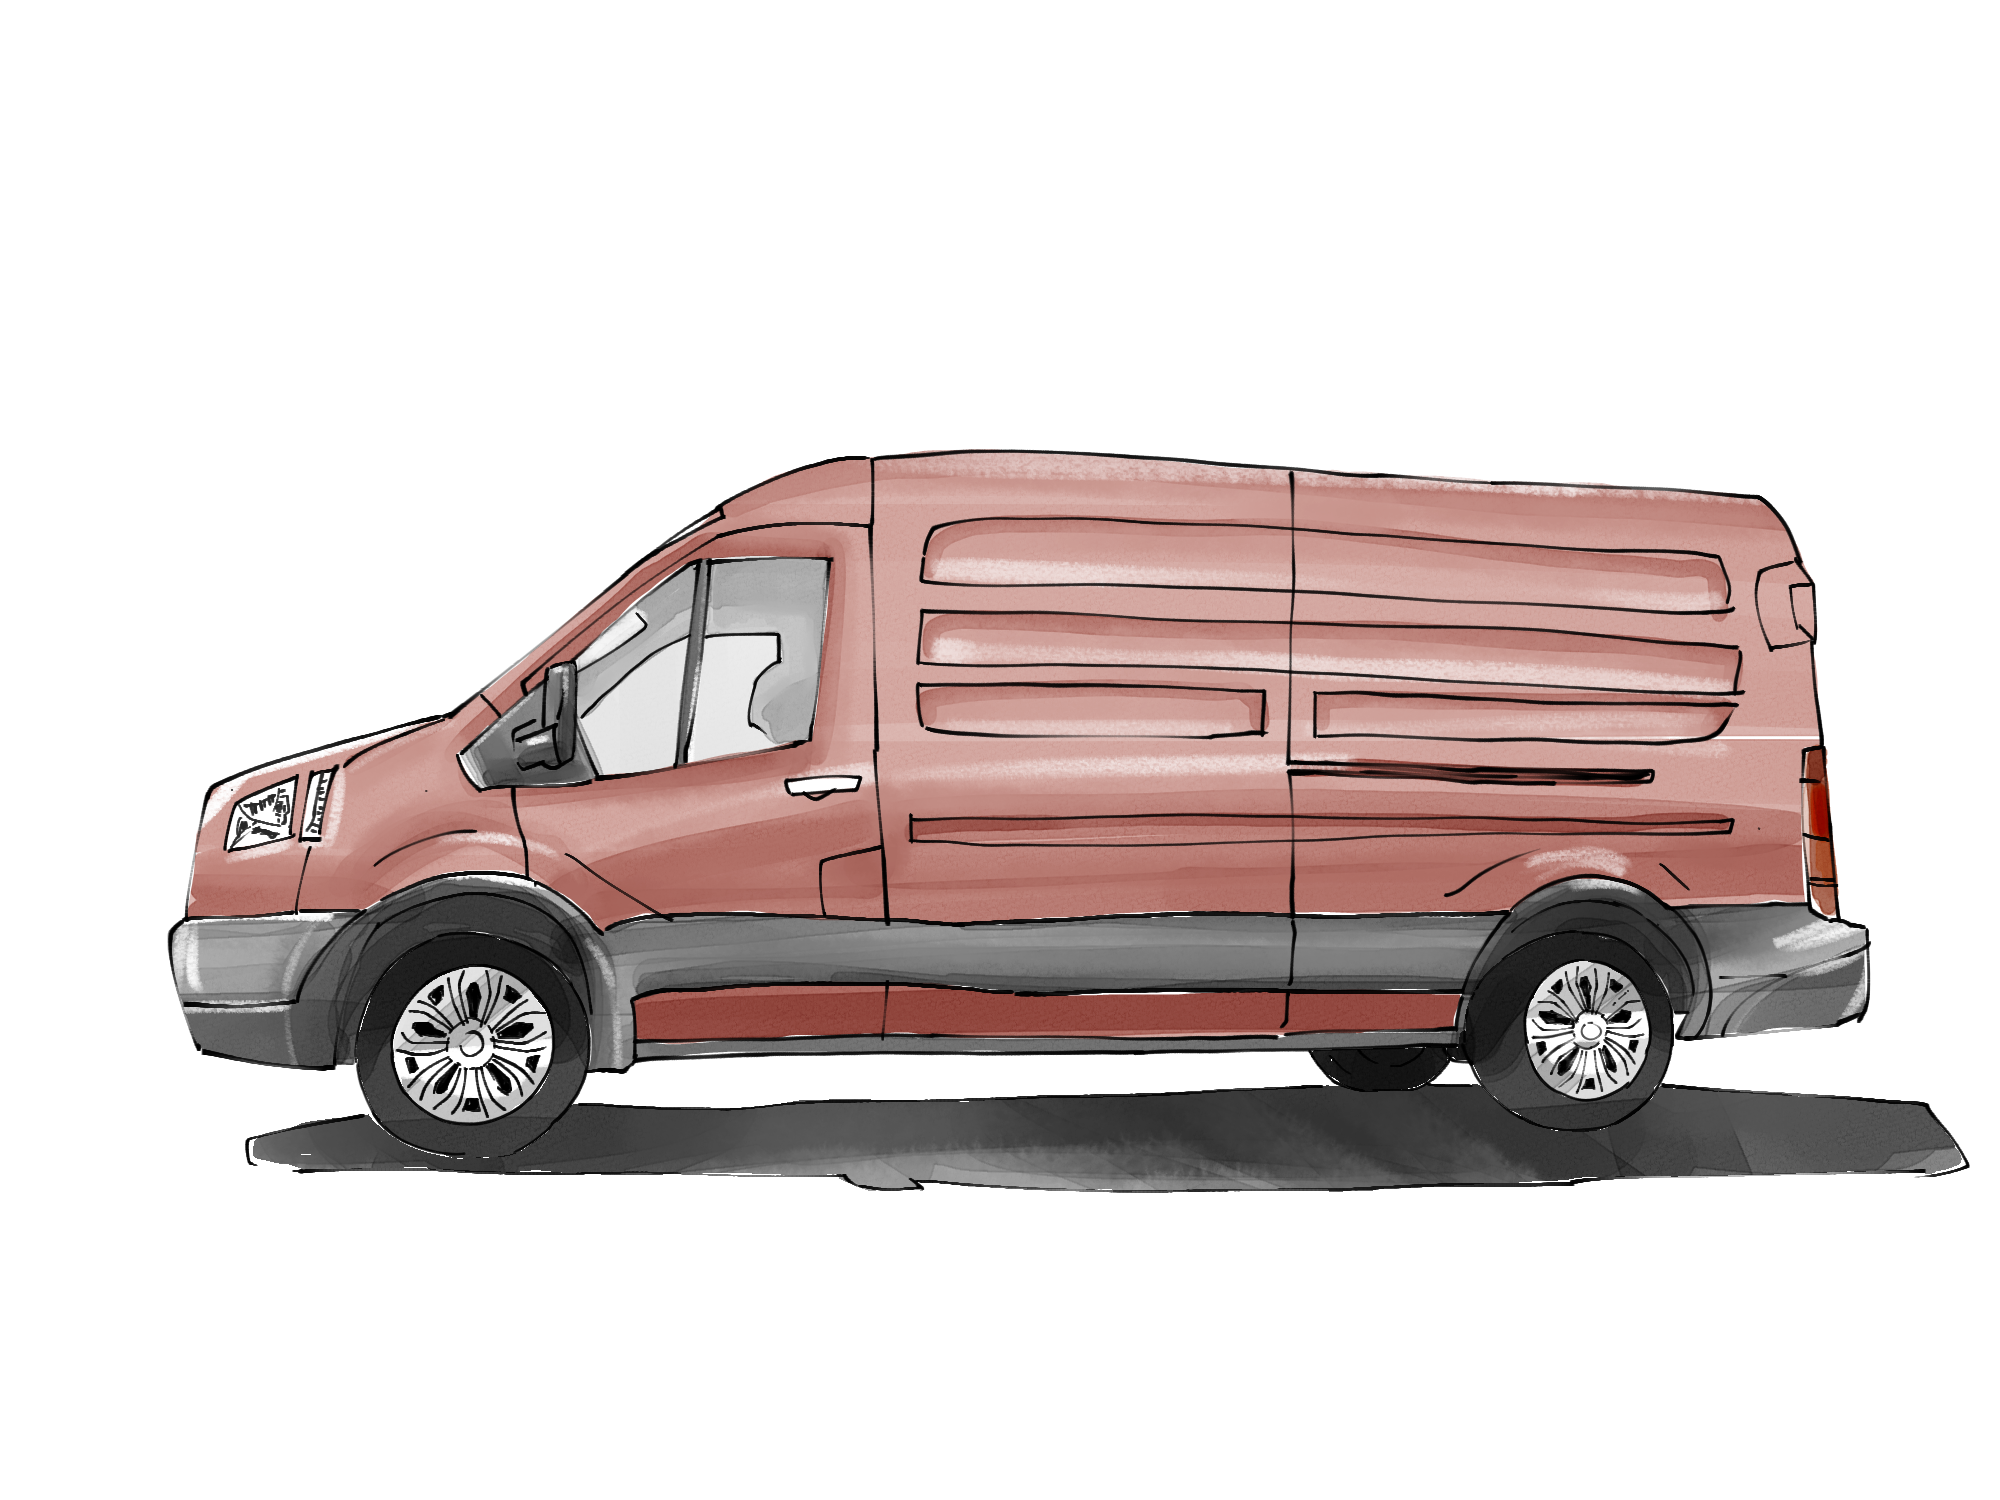  Product image 2 of the product “OX3 Minibus ”